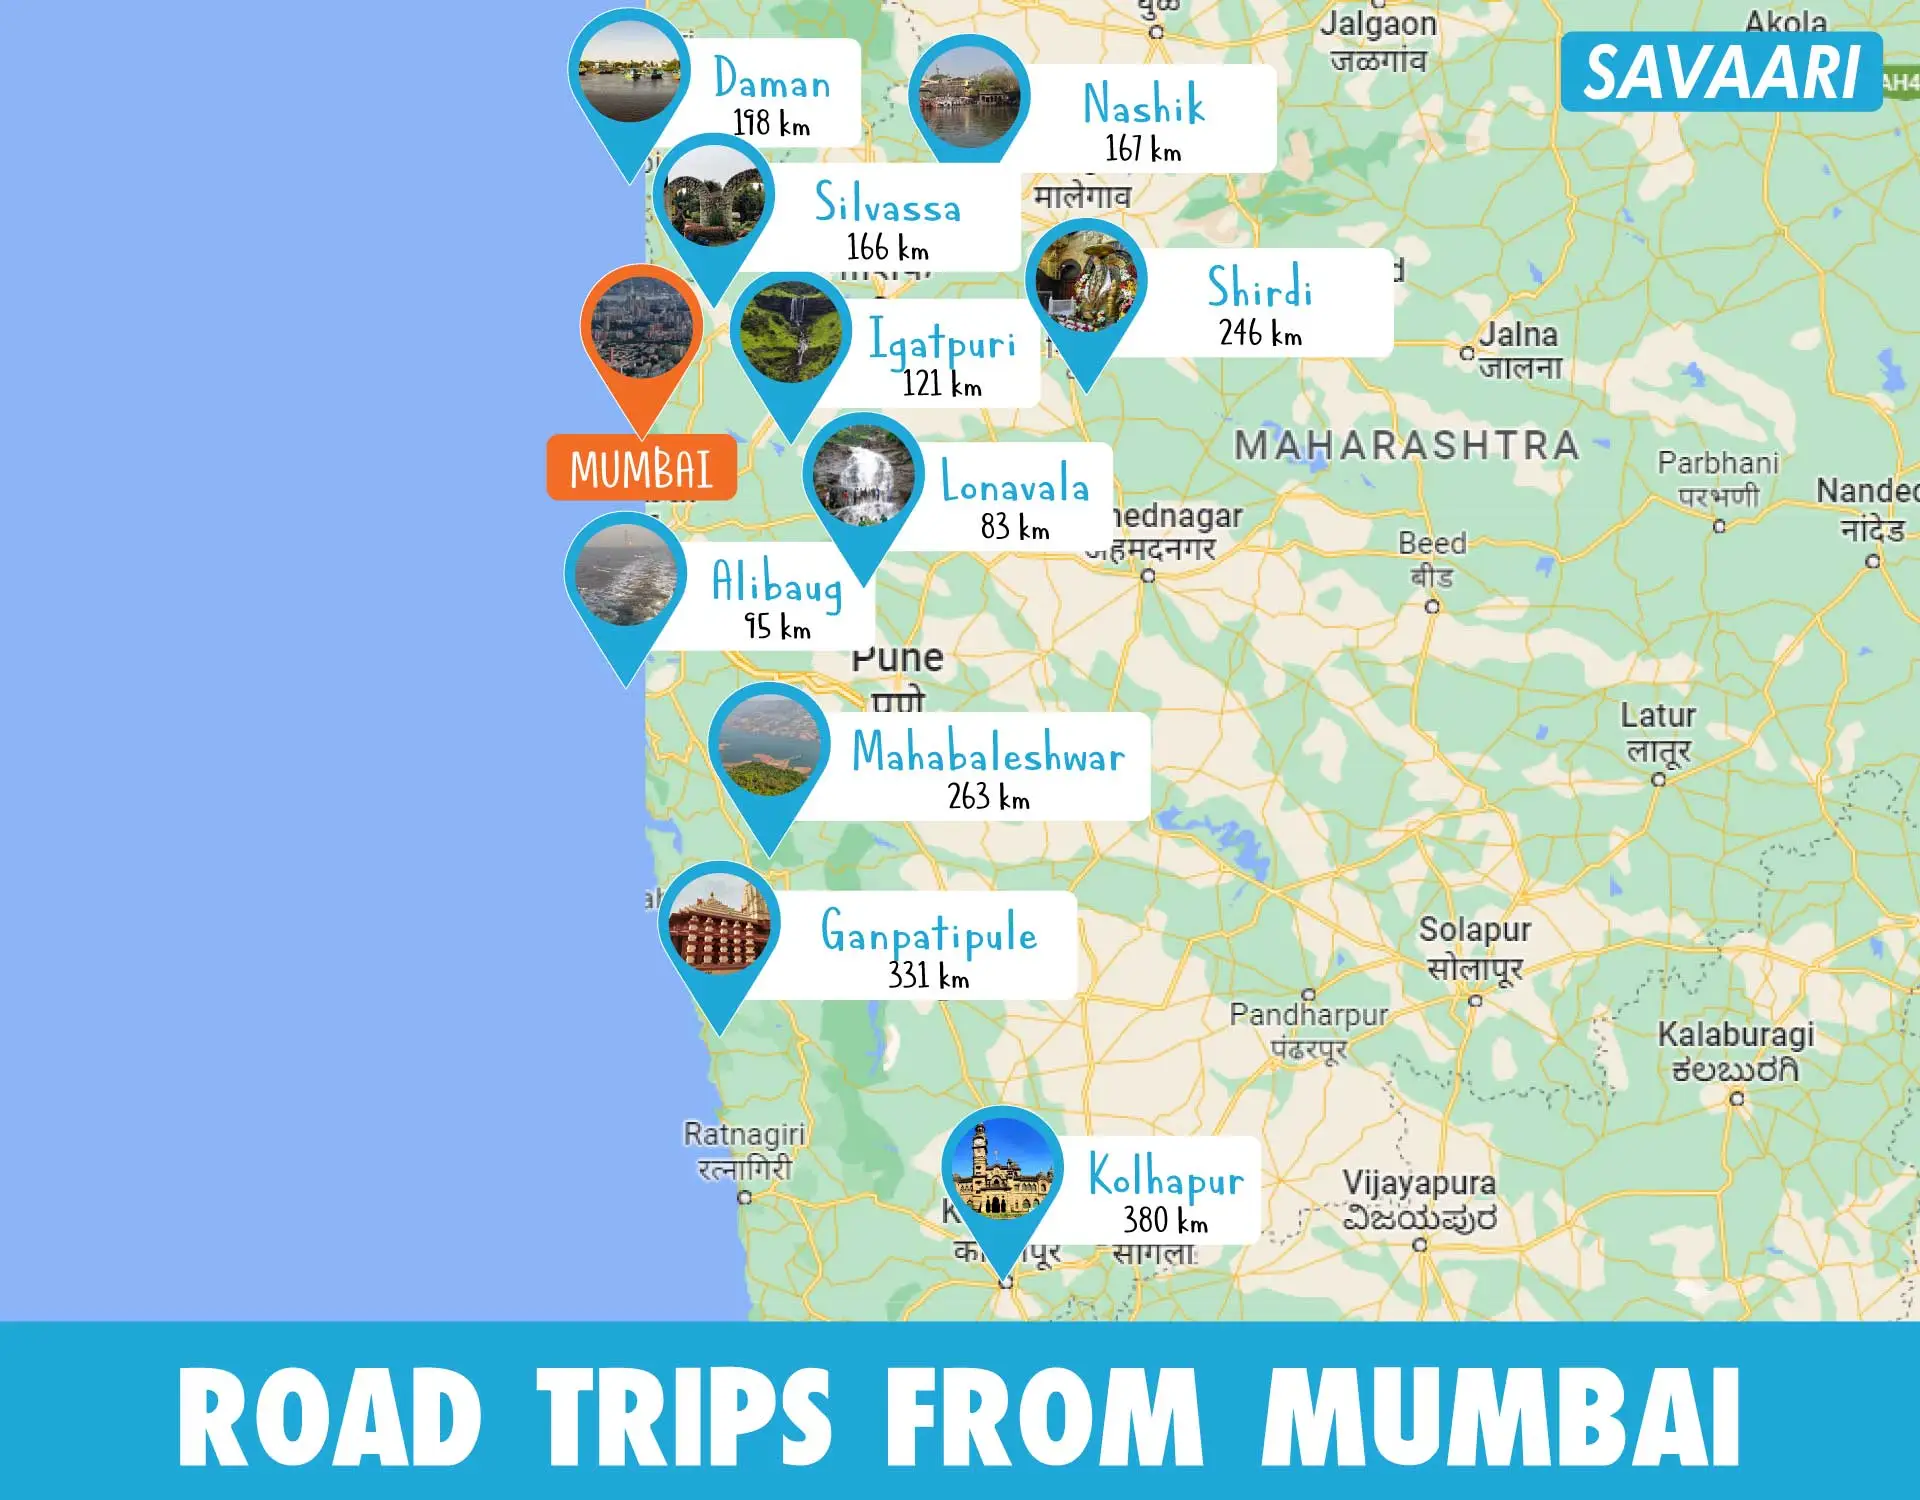 places to visit near mumbai by road